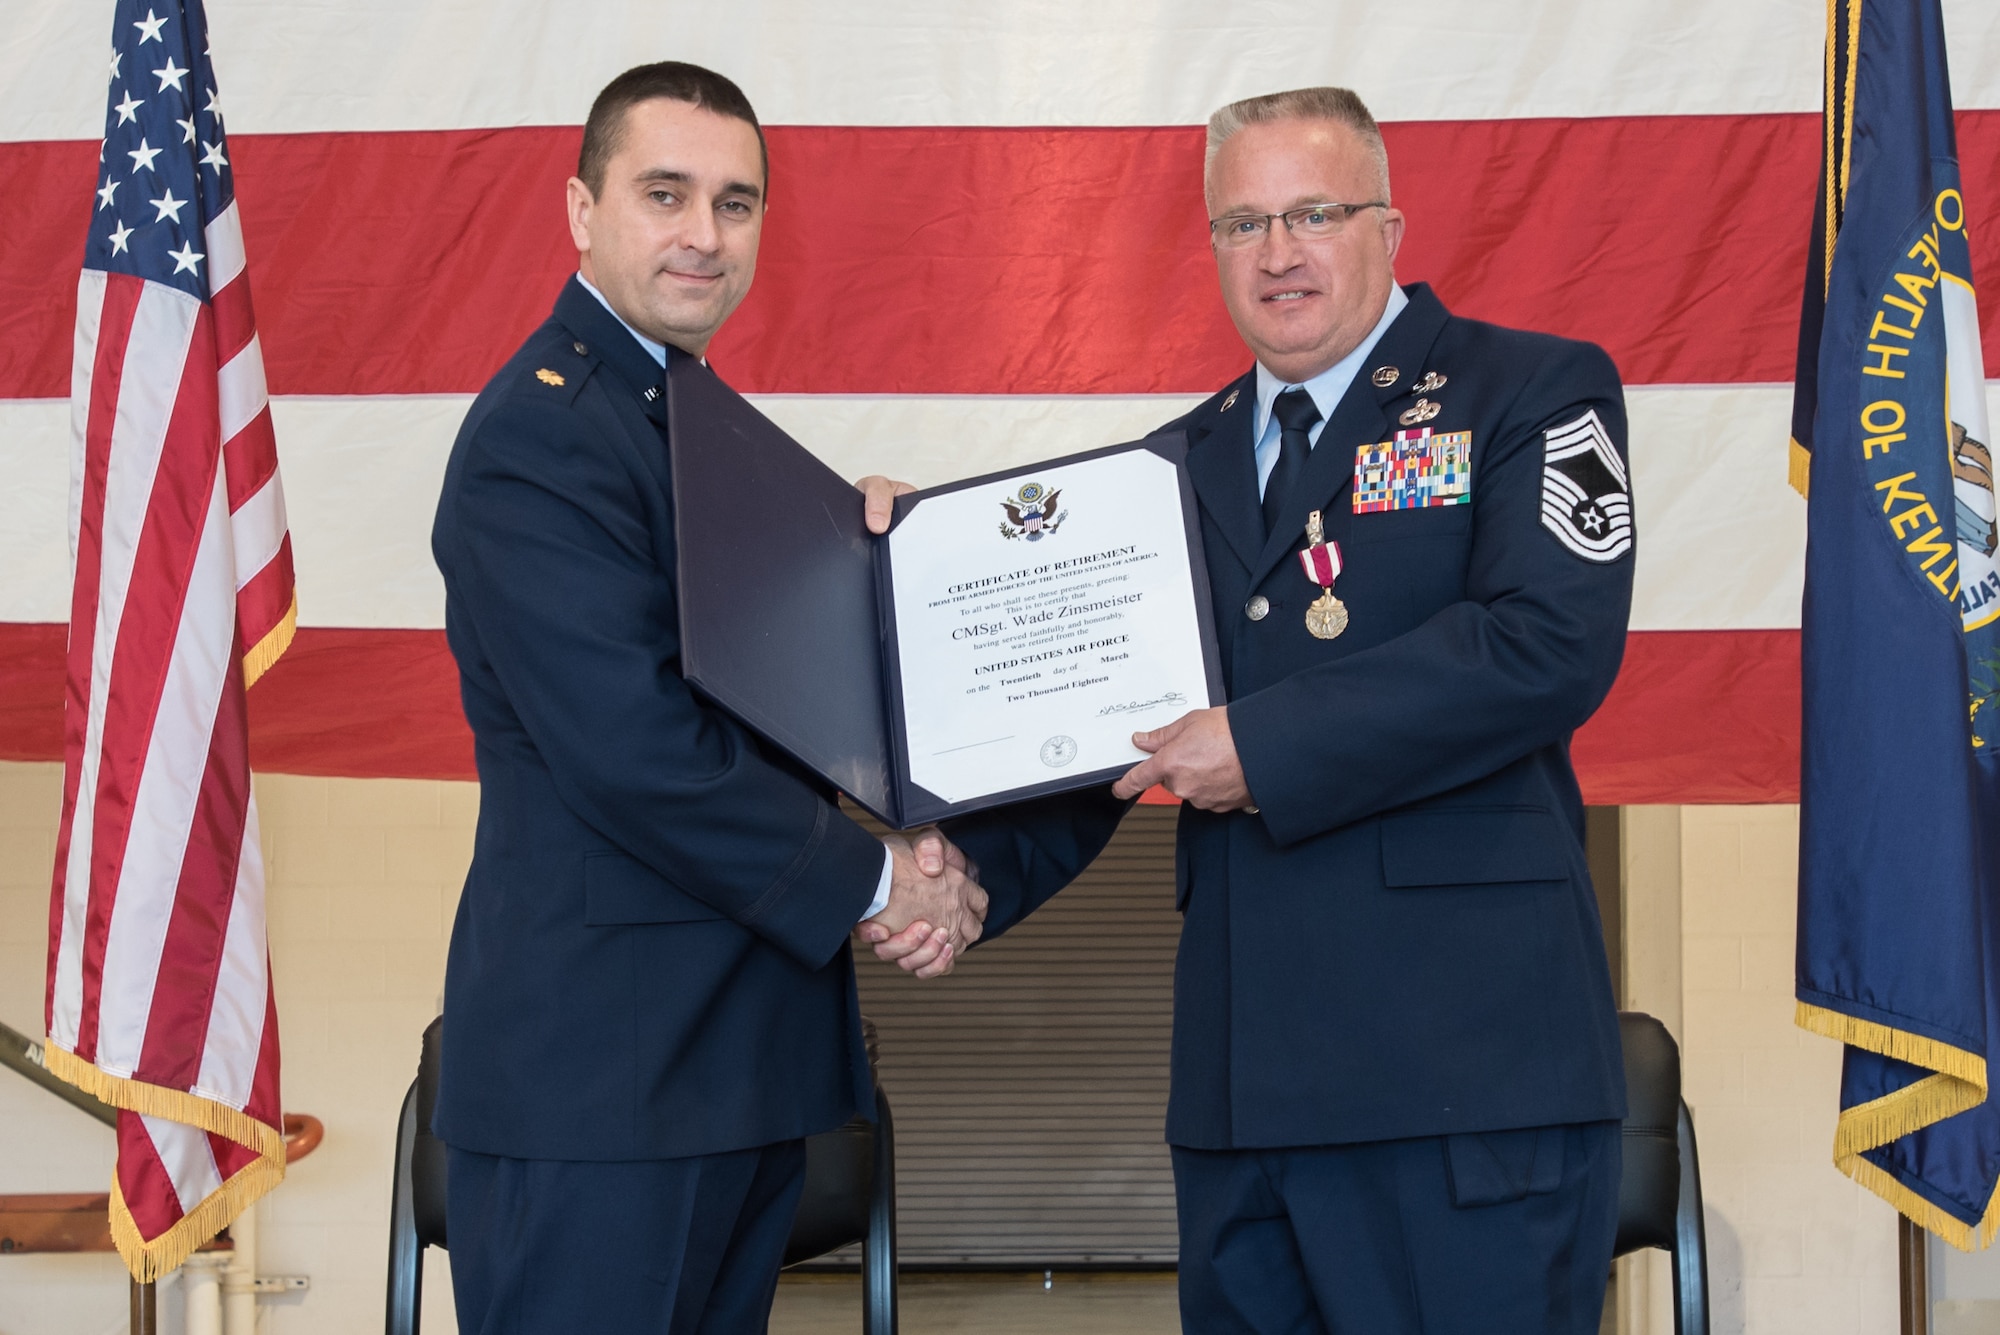 Chief Master Sgt. Wade Zinsmeister retired from the U.S. Air Force and Kentucky Air National Guard during a ceremony at the 123rd Airlift Wing in Louisville, Ky., March 4, 2018. Zinsmeister, the component maintenance flight chief in the wing’s 123rd Aircraft Maintenance Squadron, served for more than 30 years.